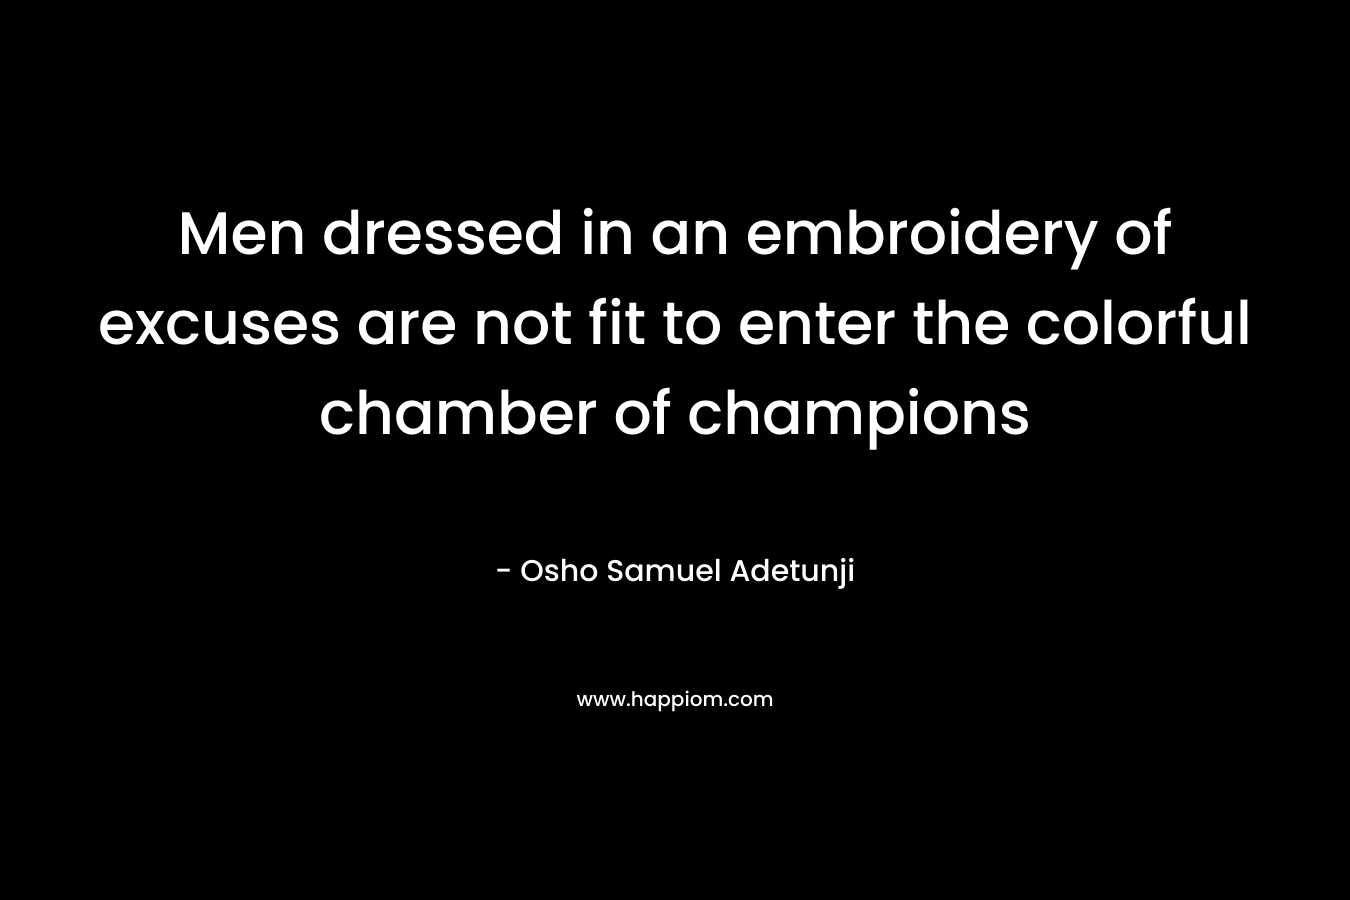 Men dressed in an embroidery of excuses are not fit to enter the colorful chamber of champions